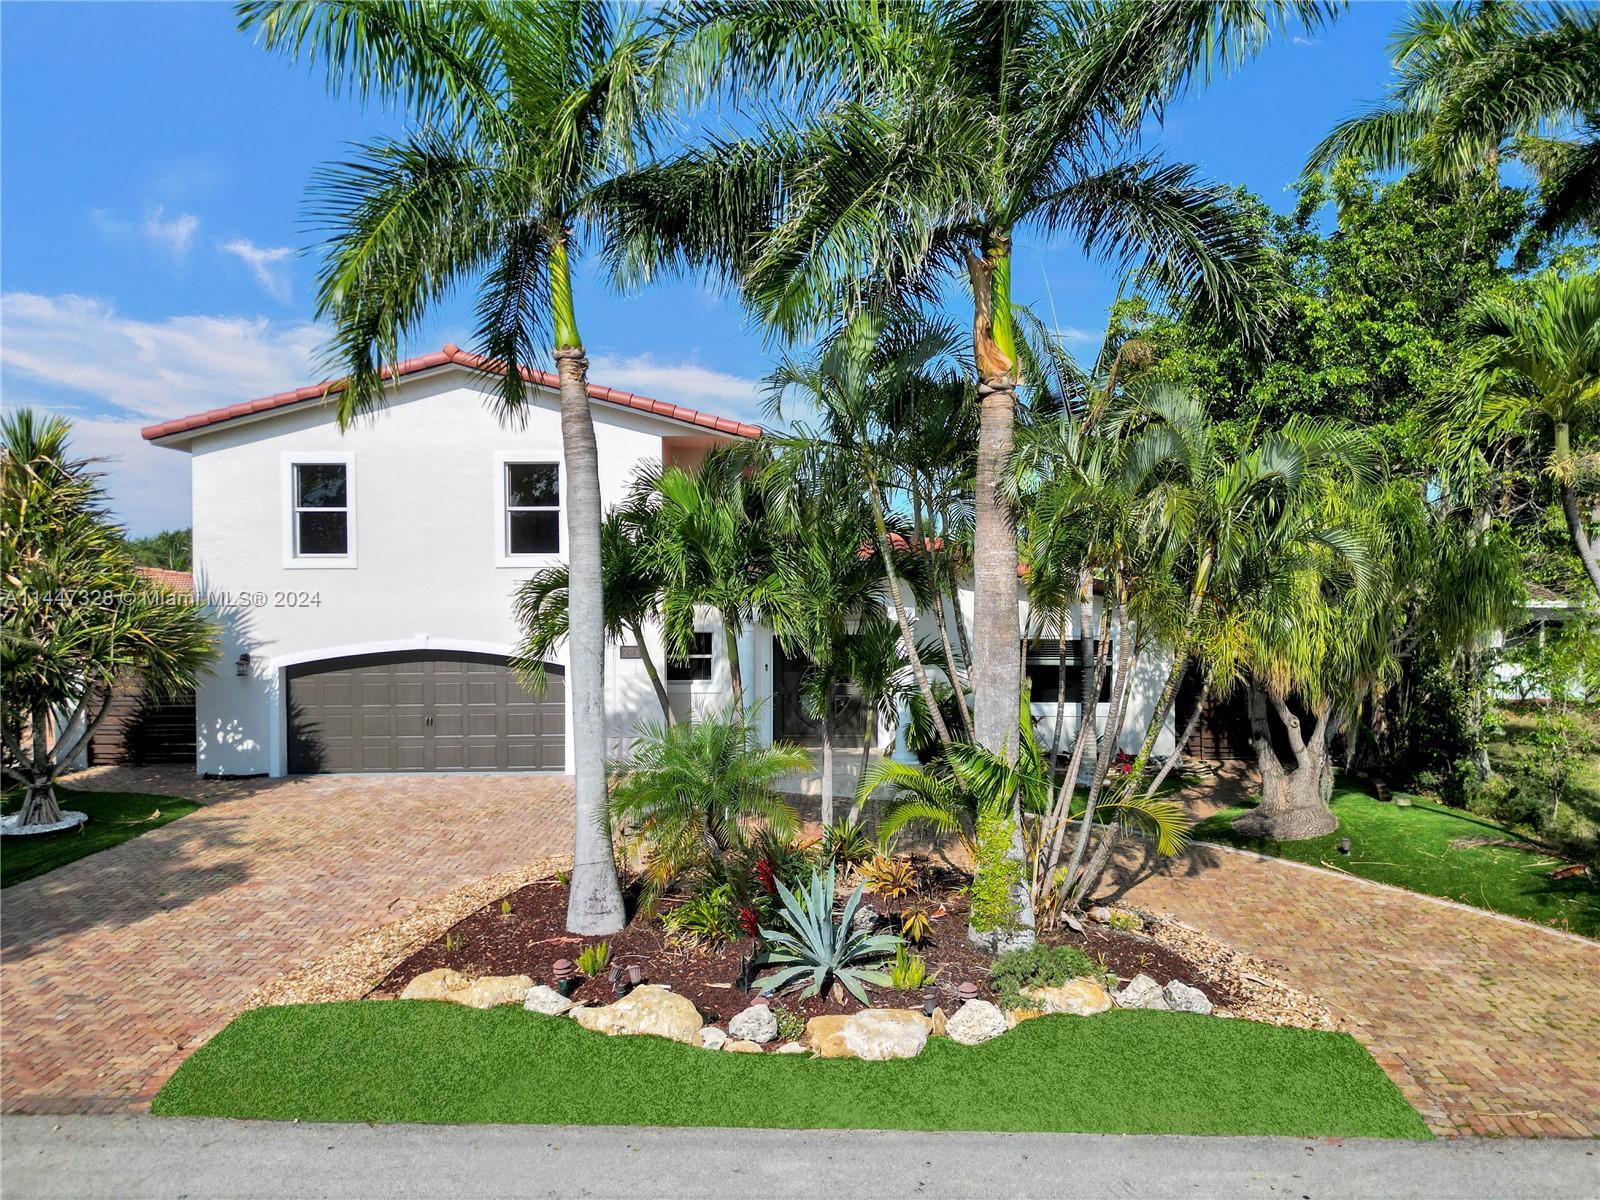 BRAND NEW ROOF, LANDSCAPING & PAINTING! Bring your boat to this one of a kind East Wilton Manors wat